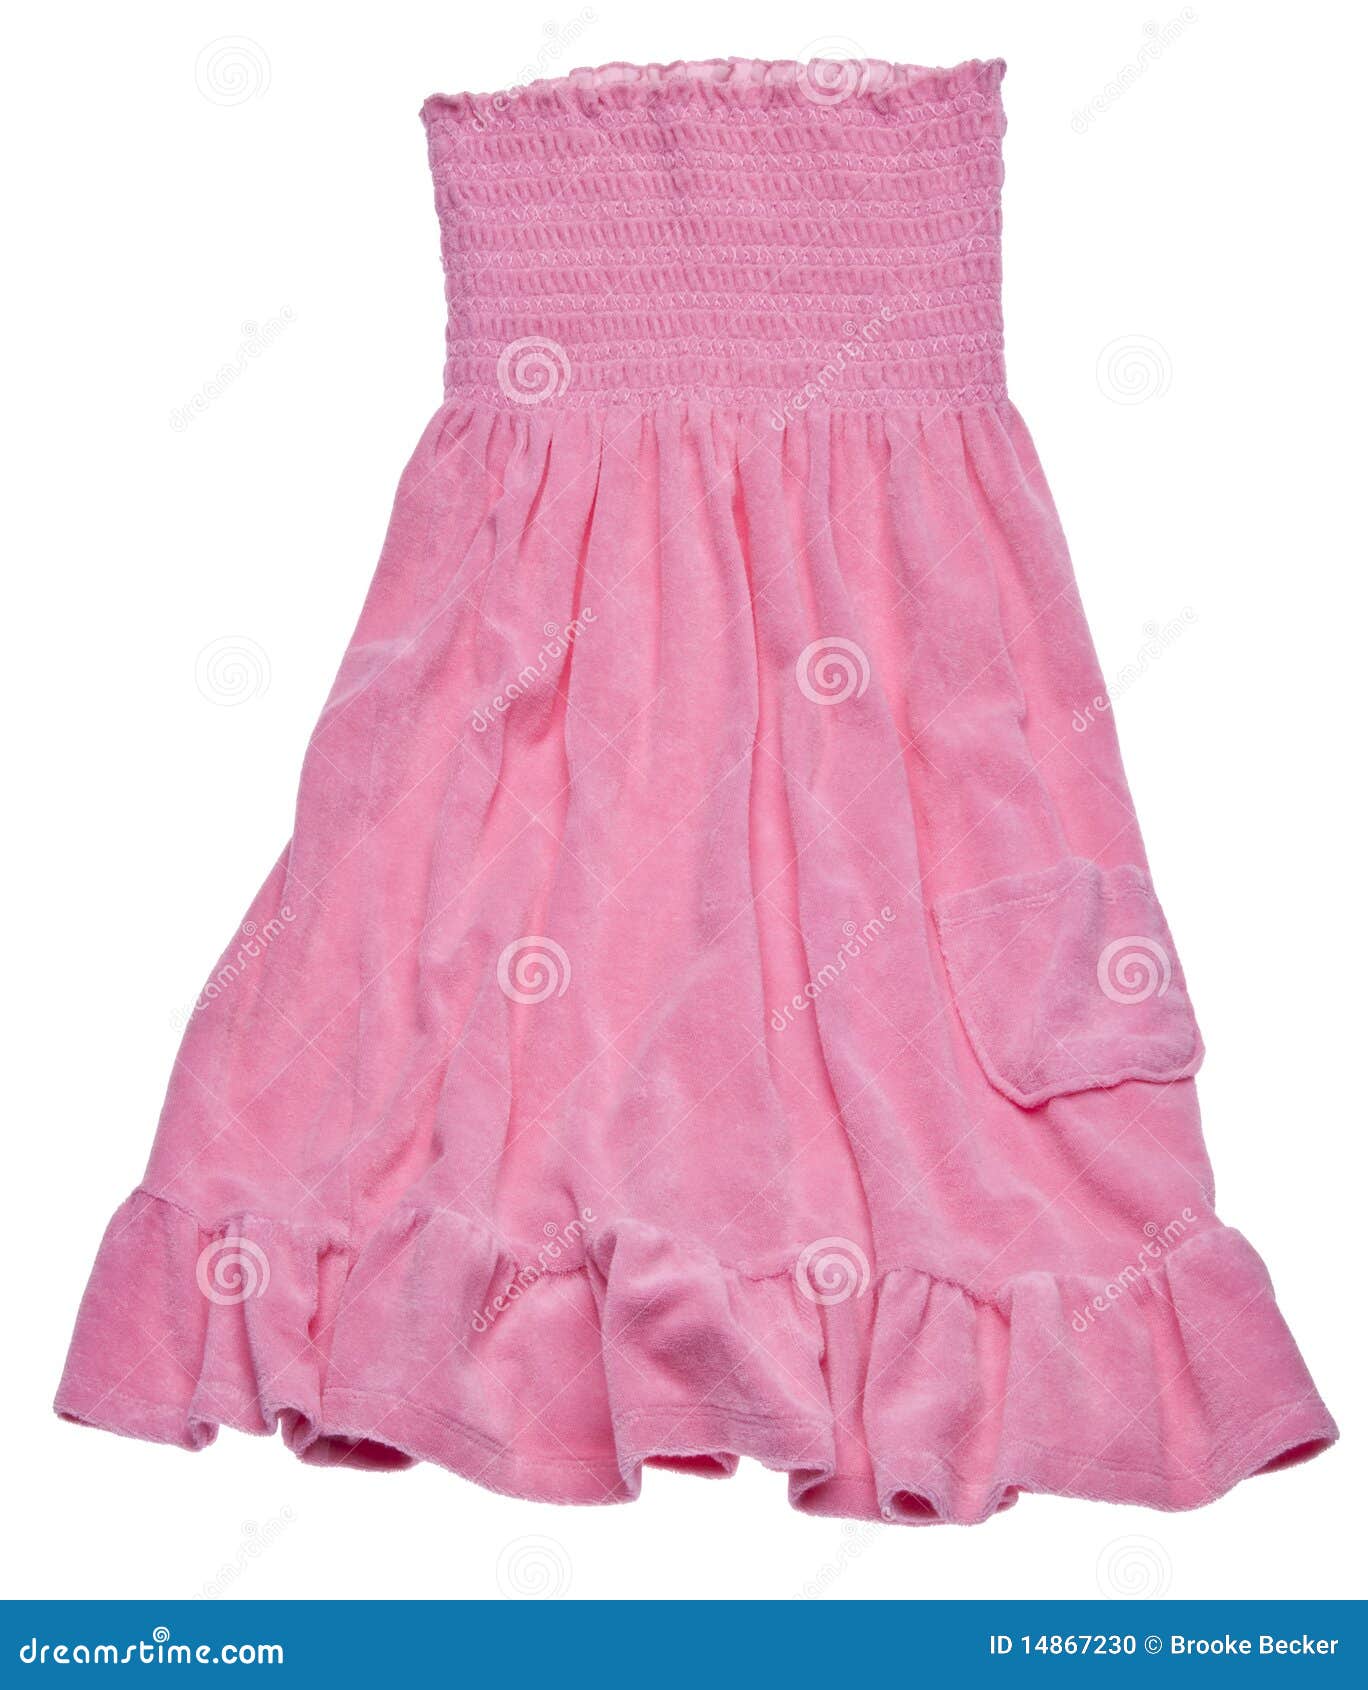 Pink Summer Dress stock photo. Image of clipping, summer - 14867230